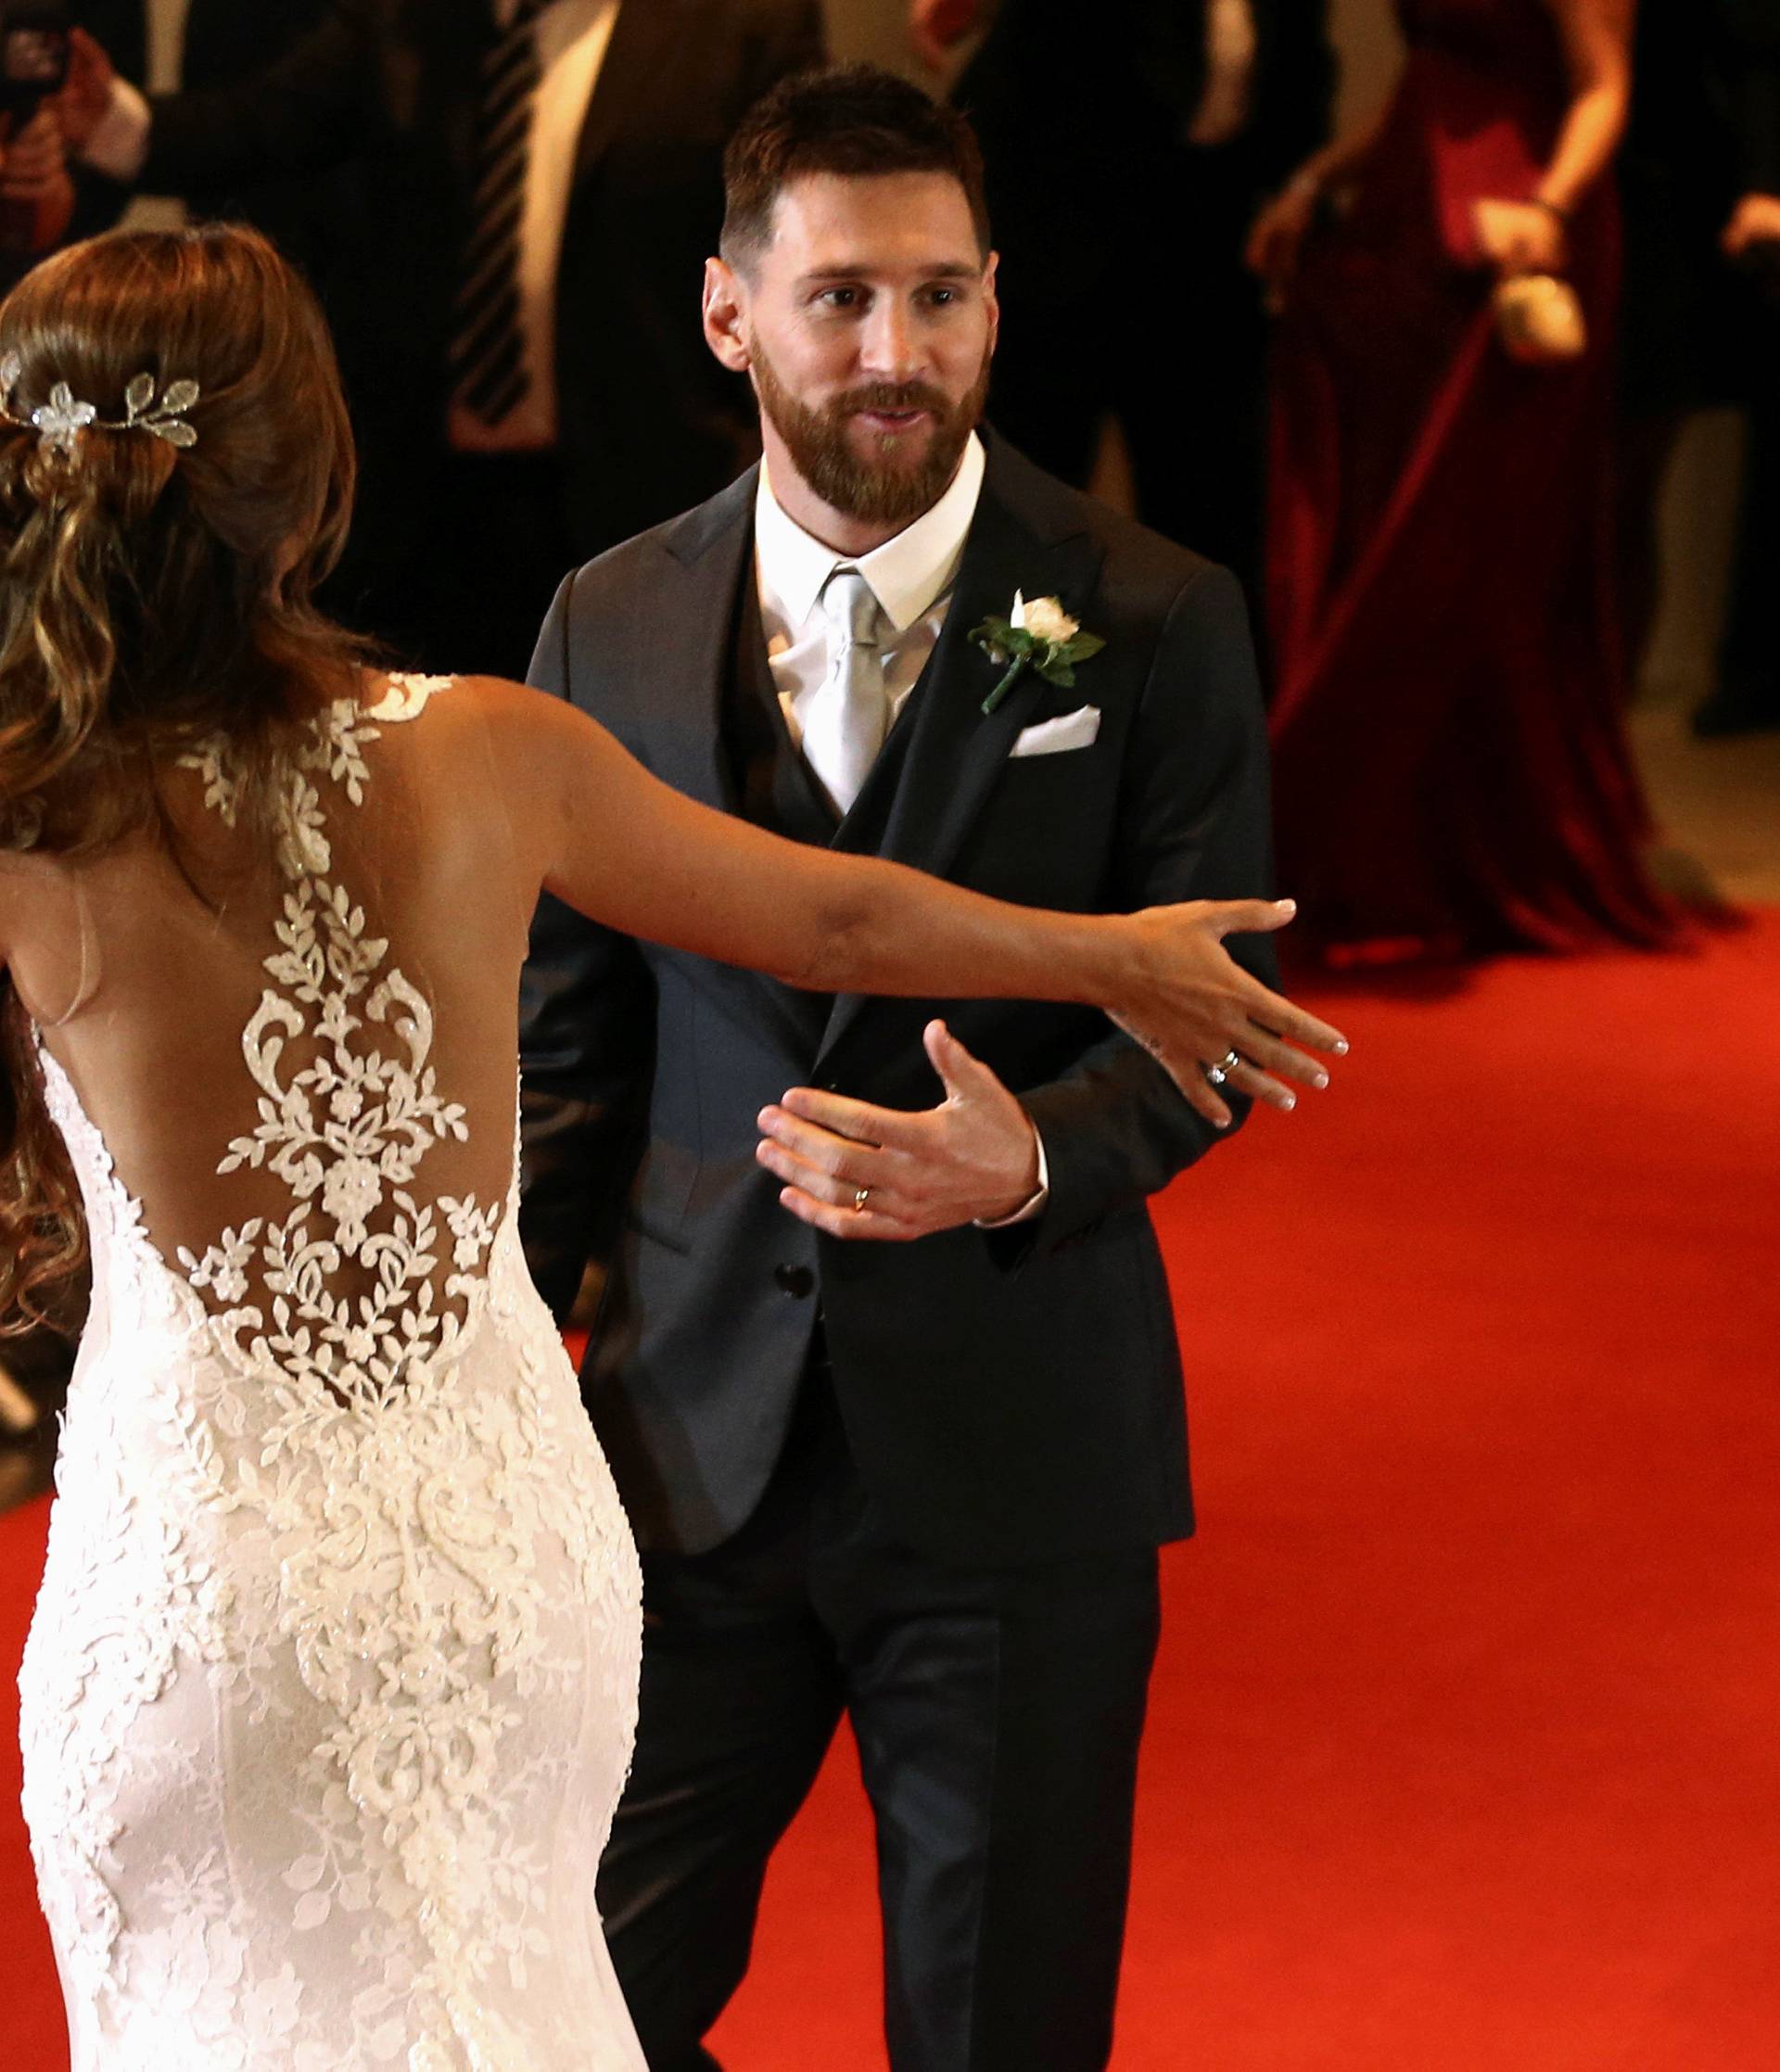 Argentine soccer player Lionel Messi and his wife Antonela Roccuzzo make an appearance for the press at their wedding in Rosario